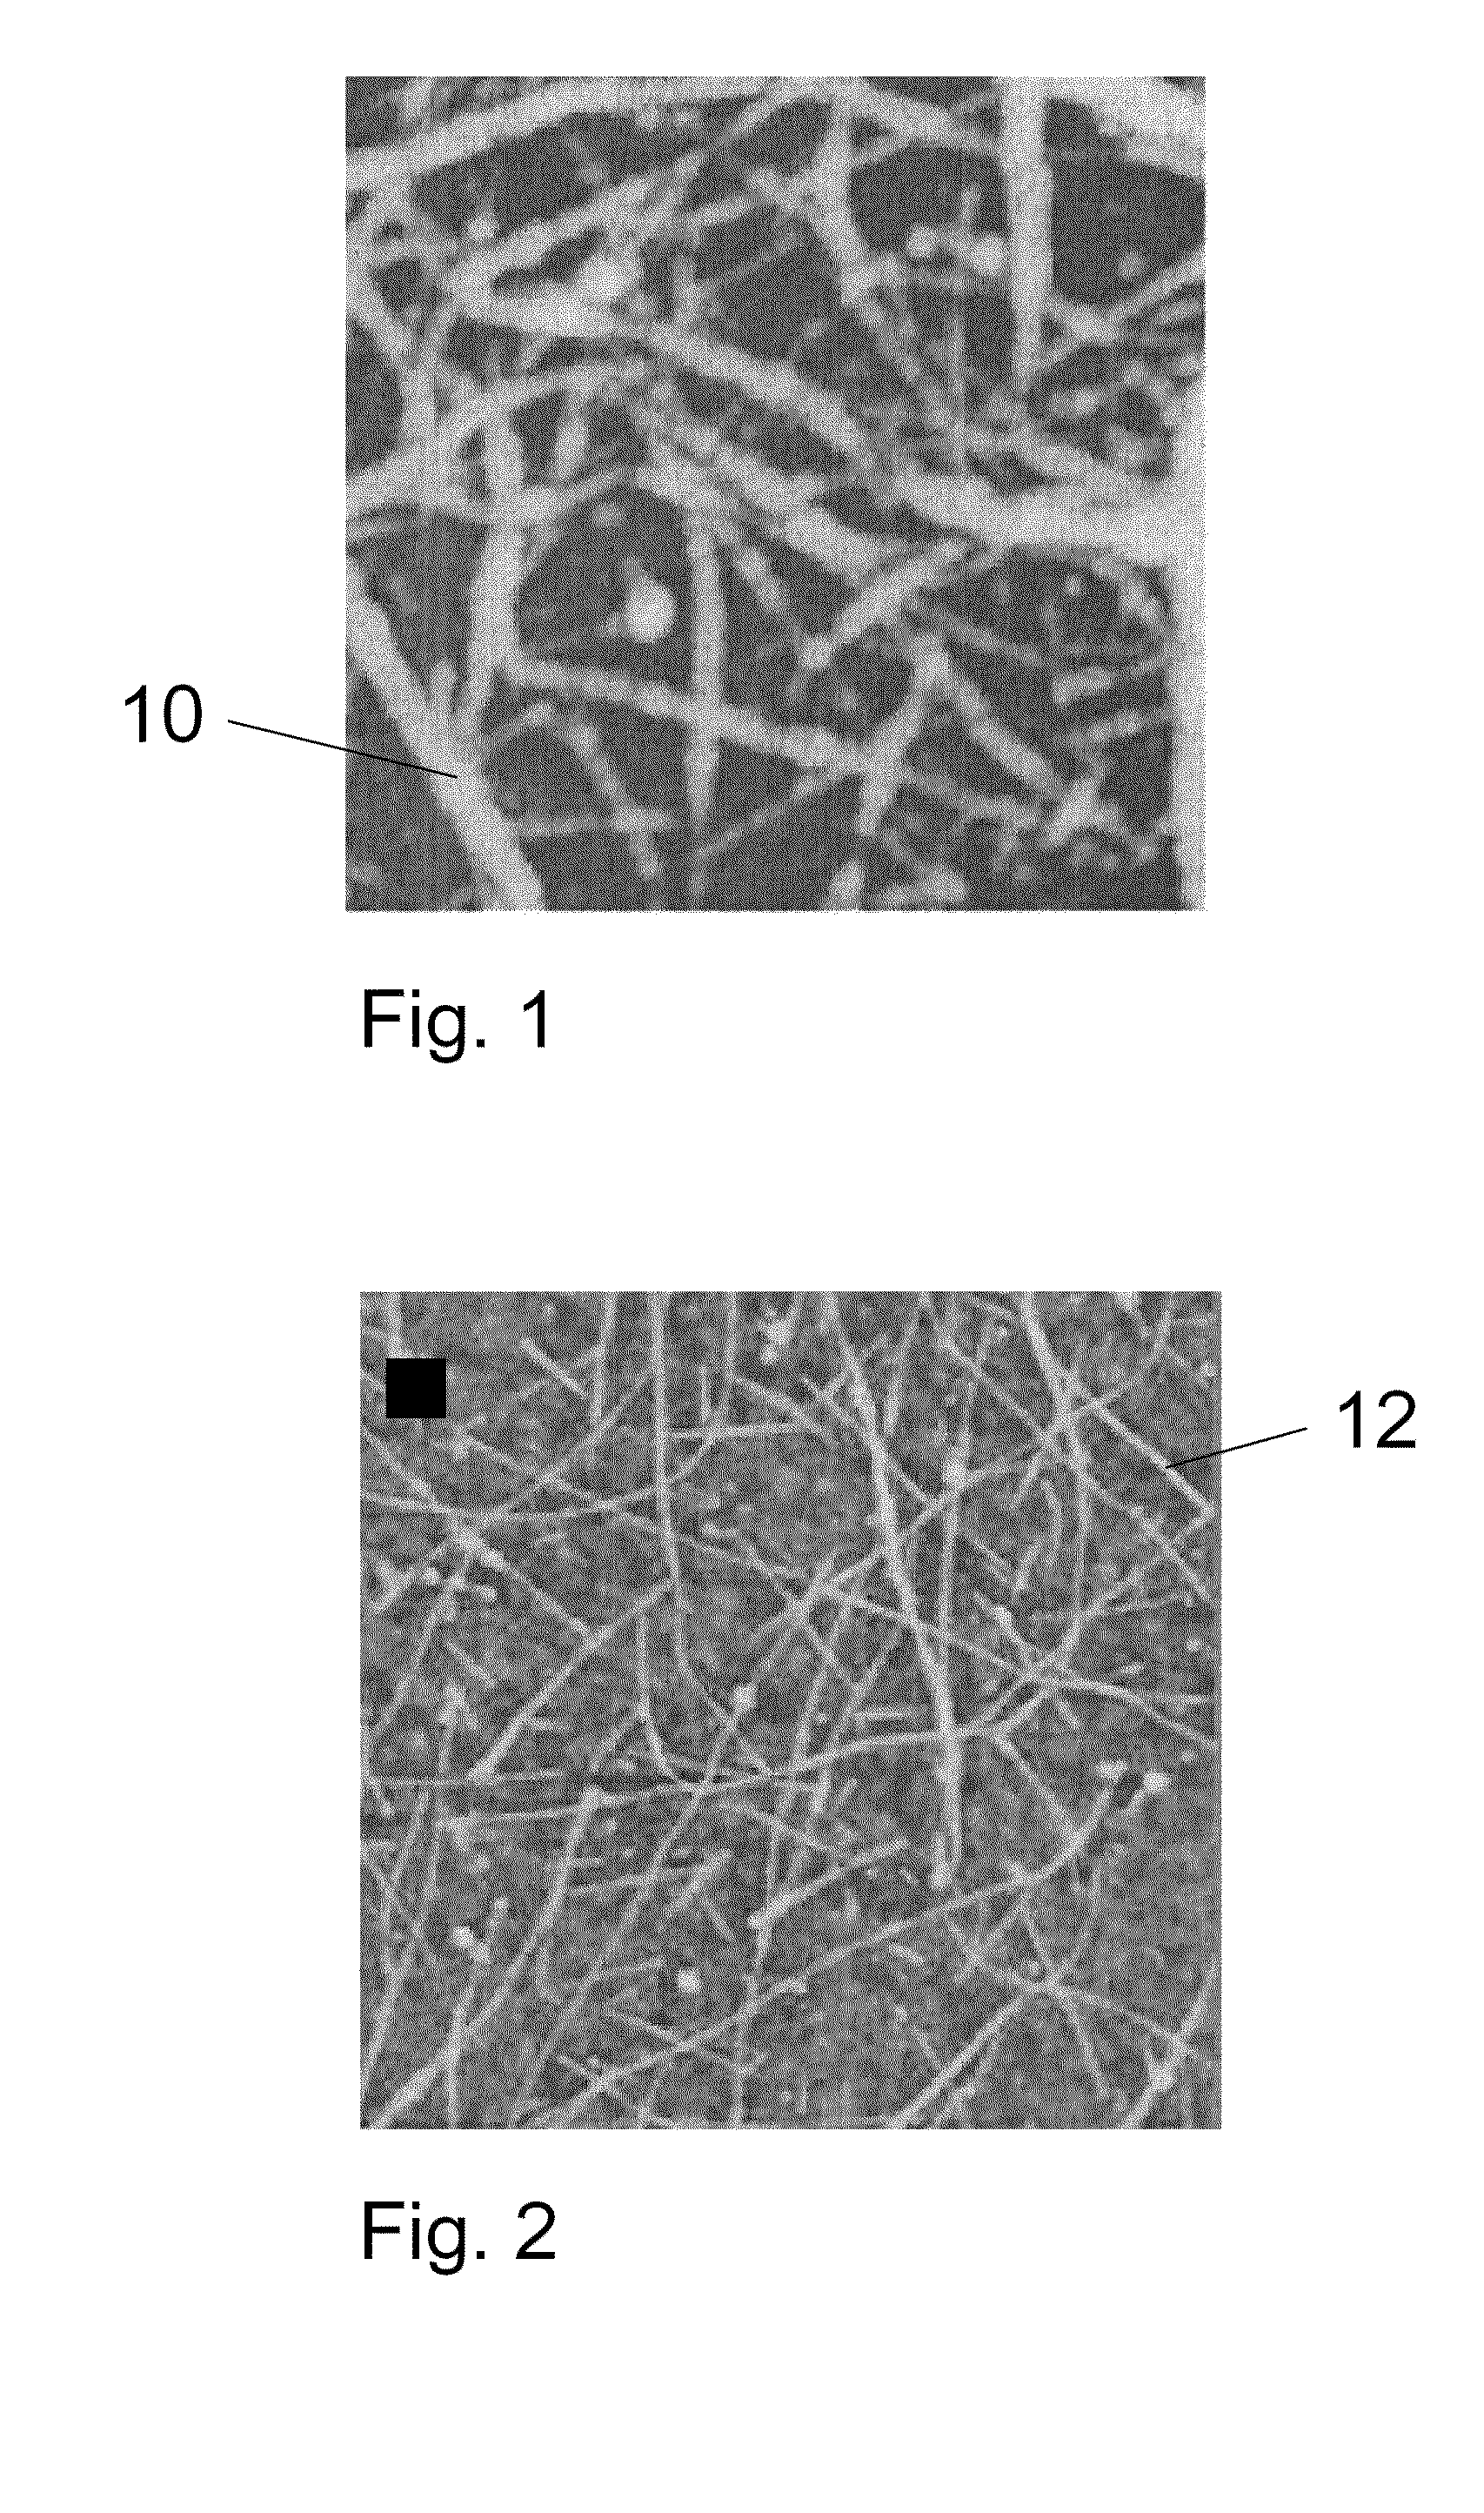 Process for cleaning carbon nanotubes and other nanostructured films